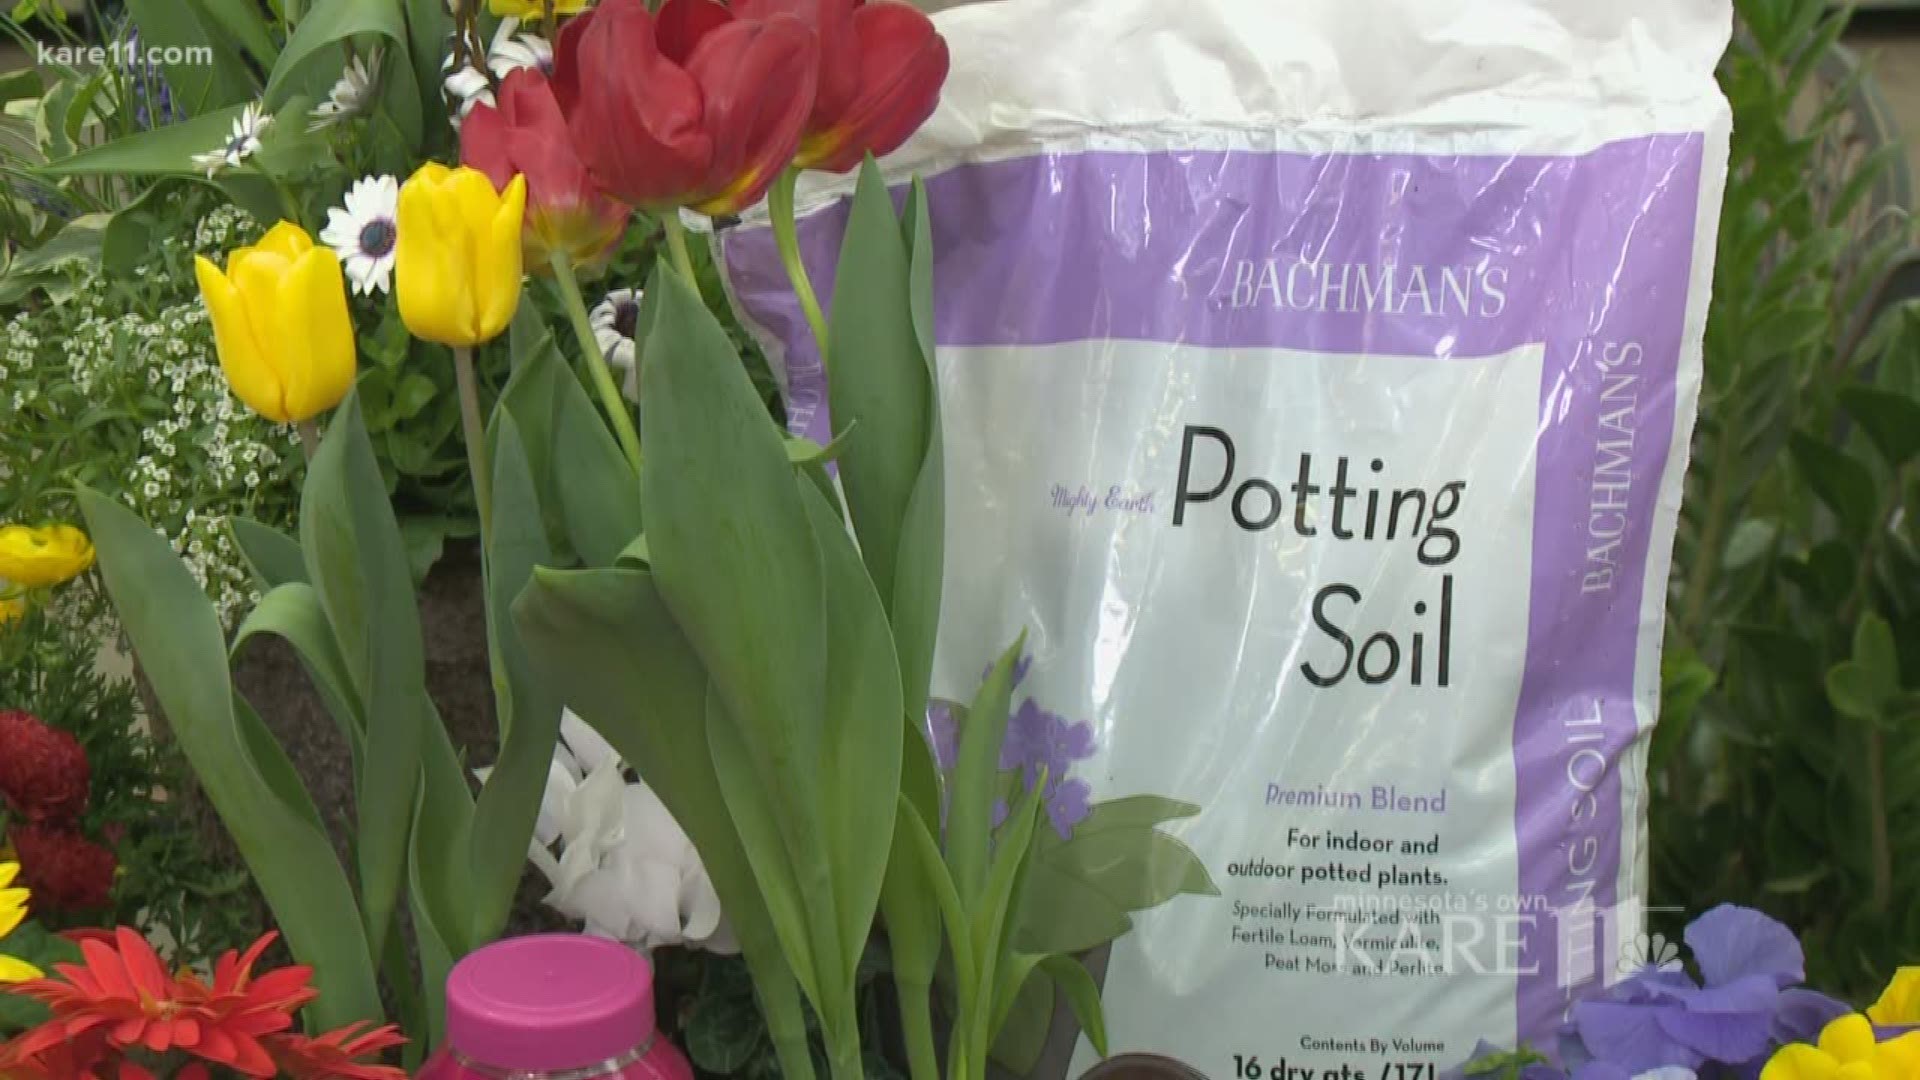 Because the soil is still wet and cold, try planting in a container until it's dry. Bachman's has some tips for the best ways to get started.